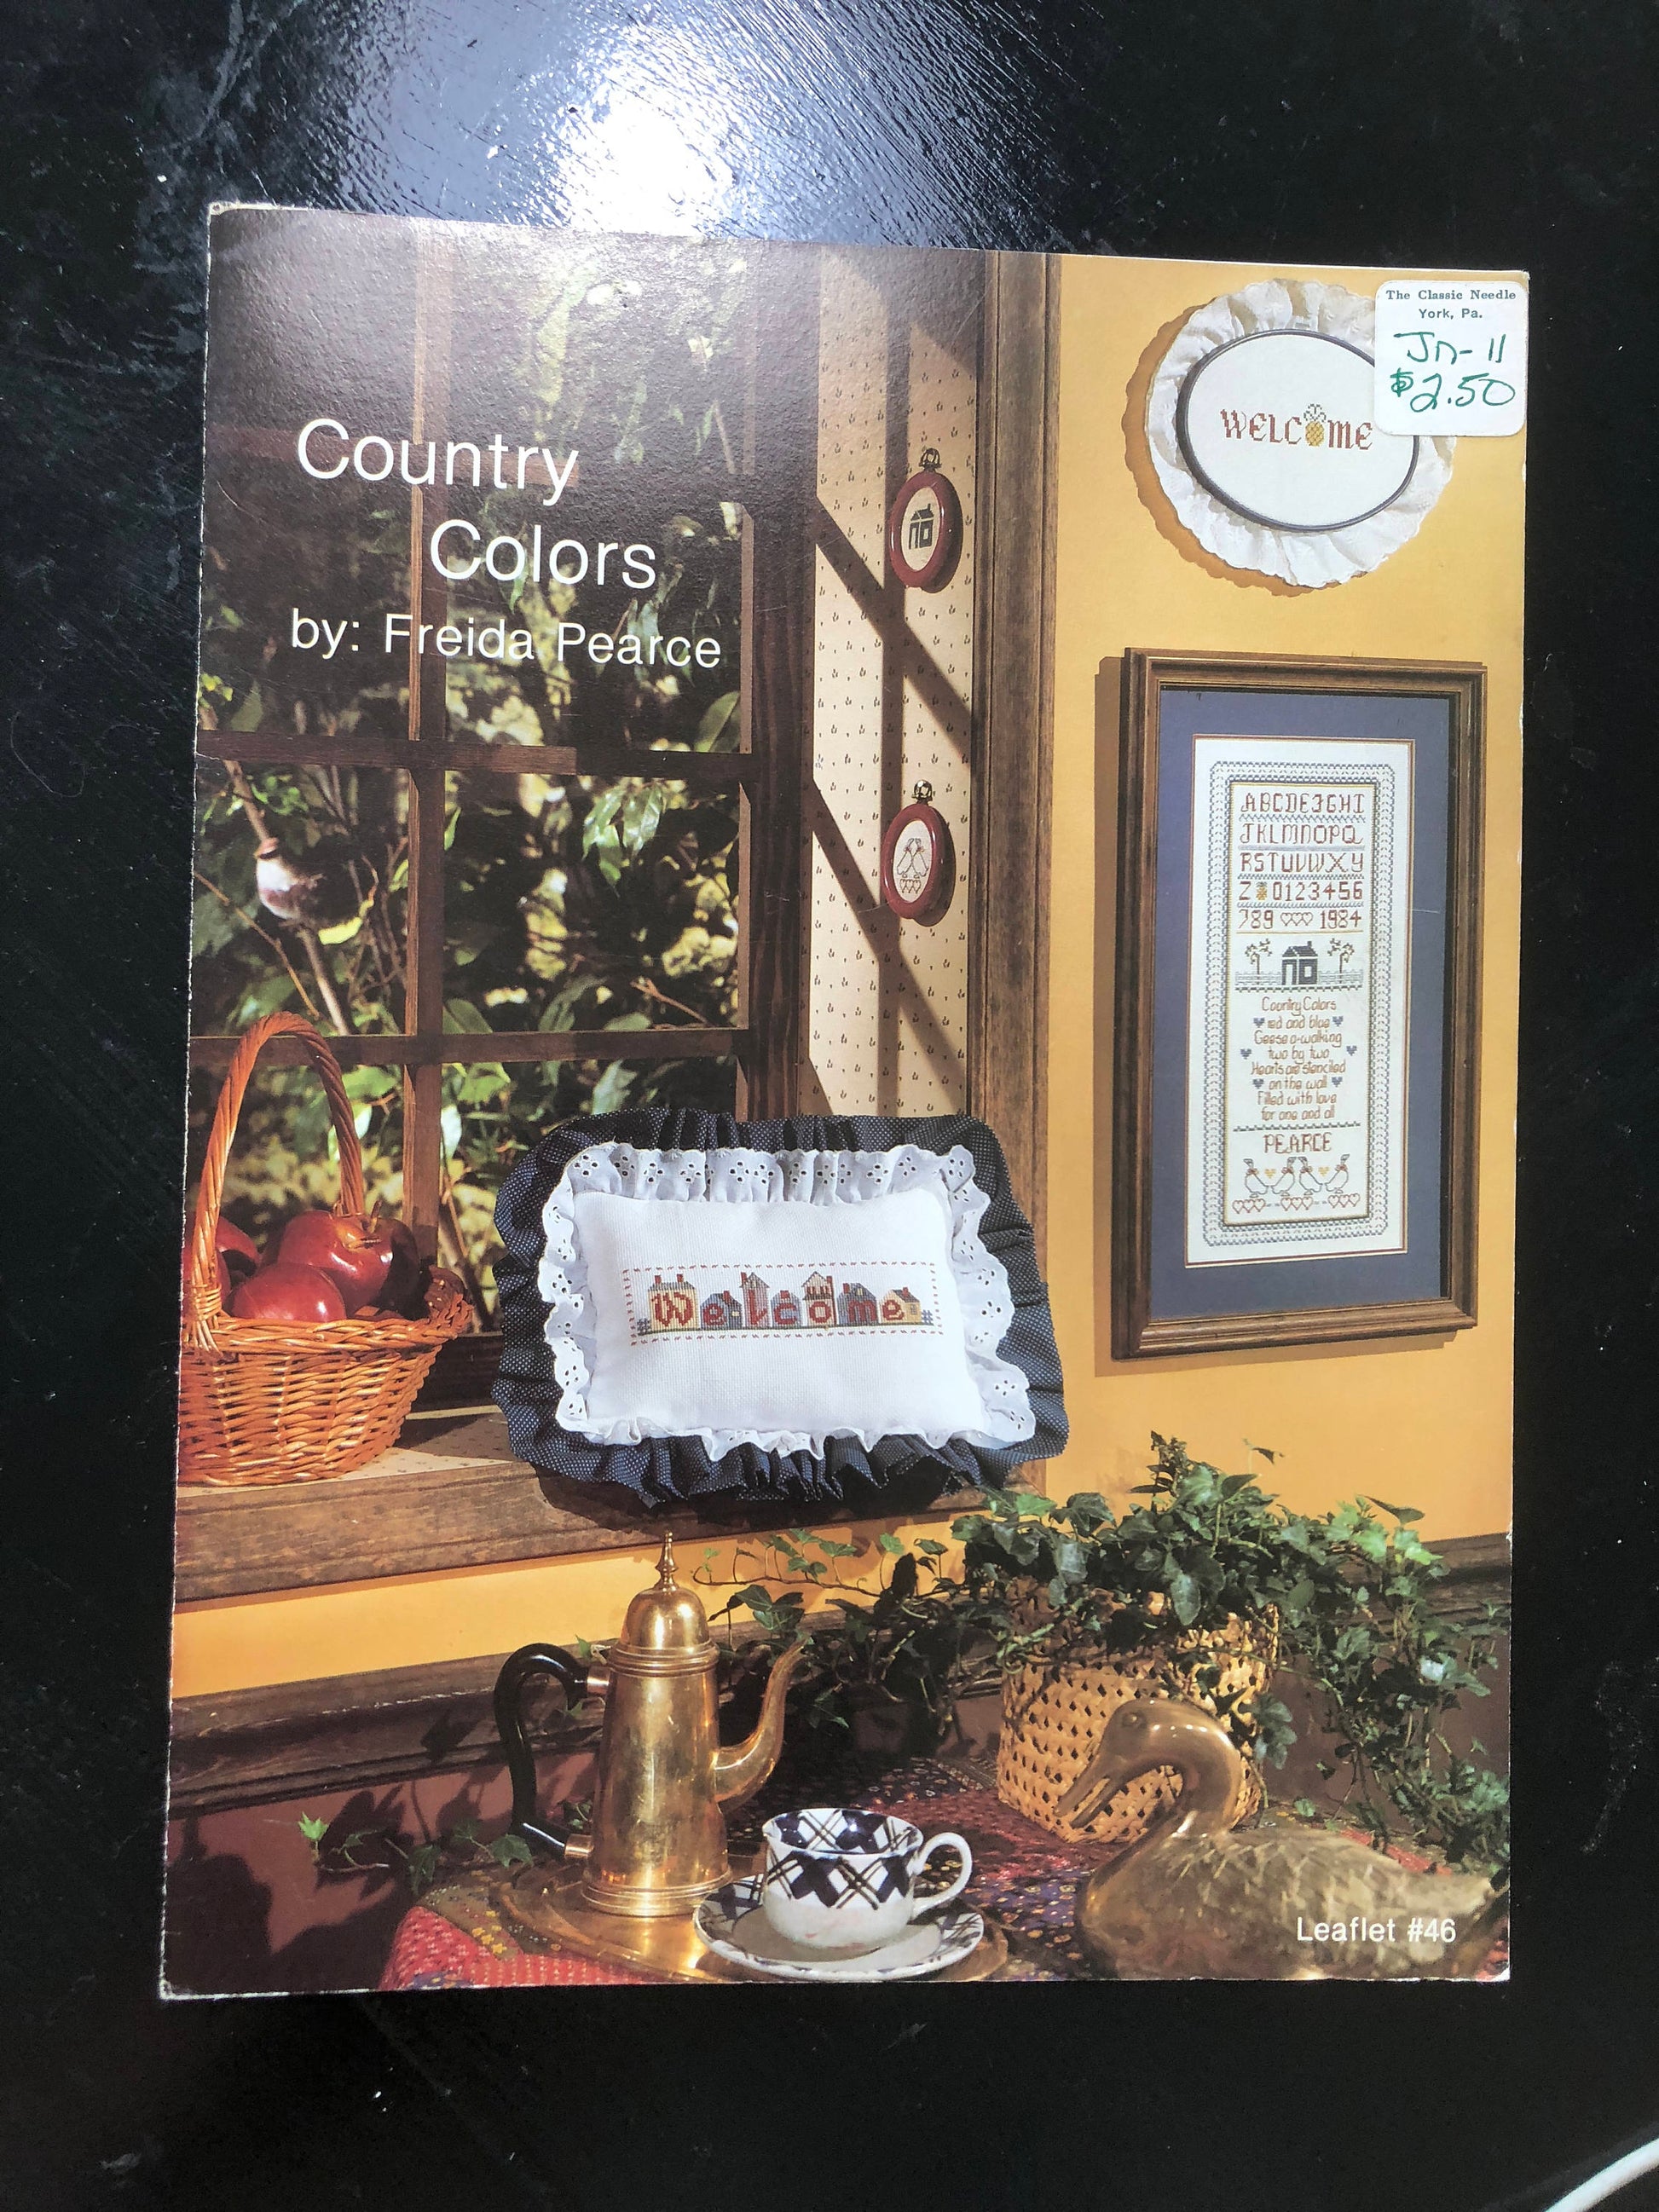 Freida Pearce, Country Colors, Leaflet #46, Vintage, Counted, Cross Stitch Pattern